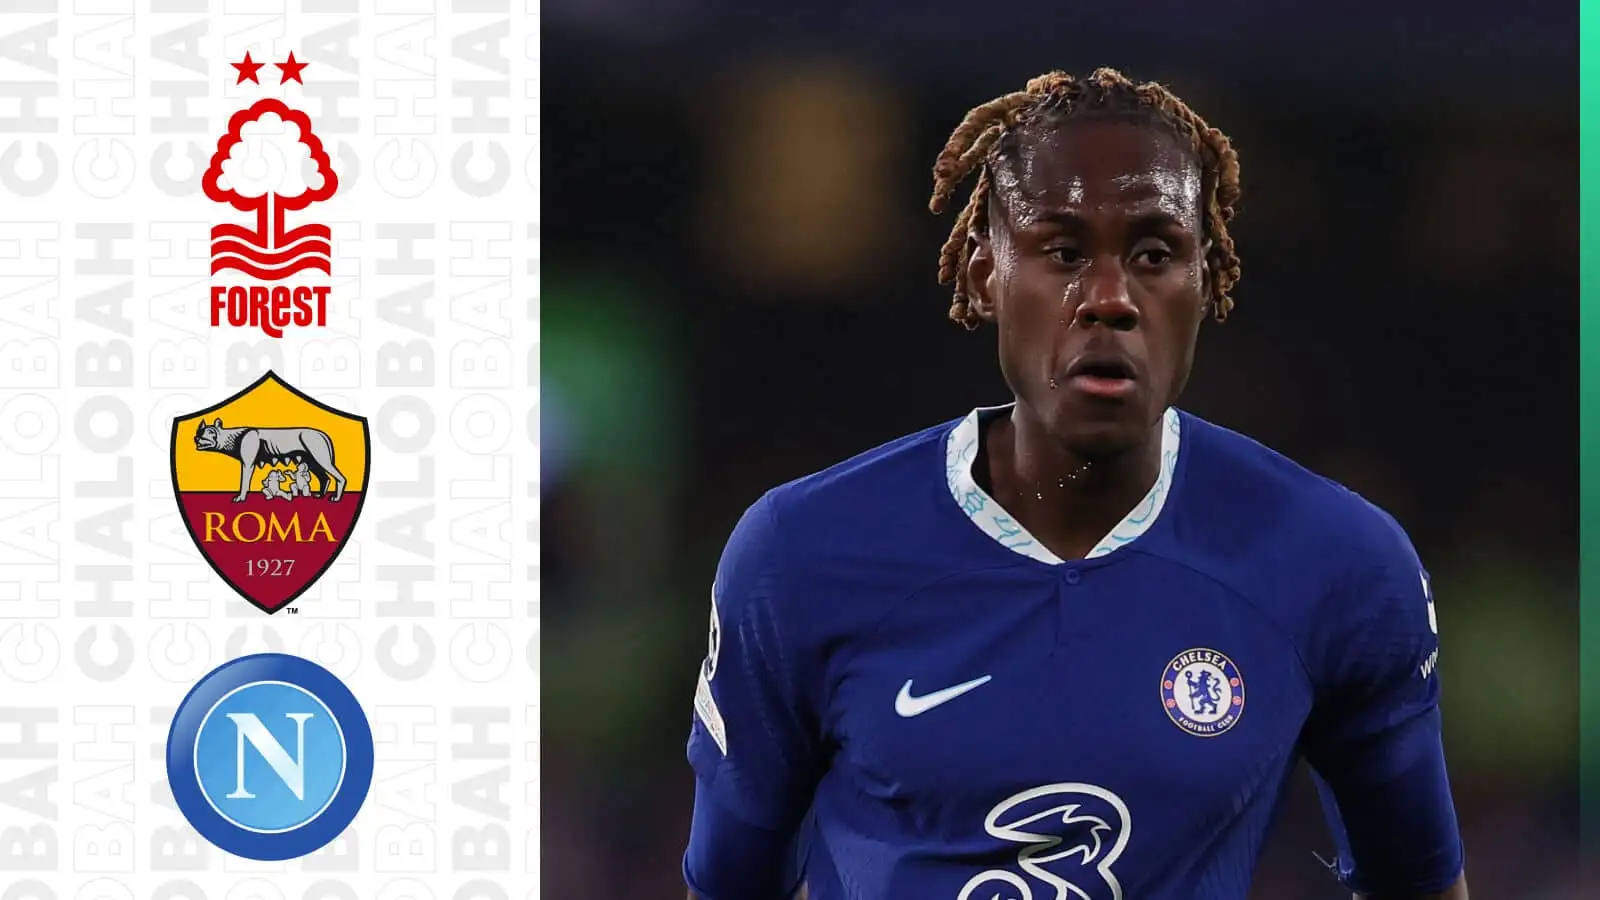 Trevoh Chalobah and the Nottingham Forest, Roma and Napoli badges